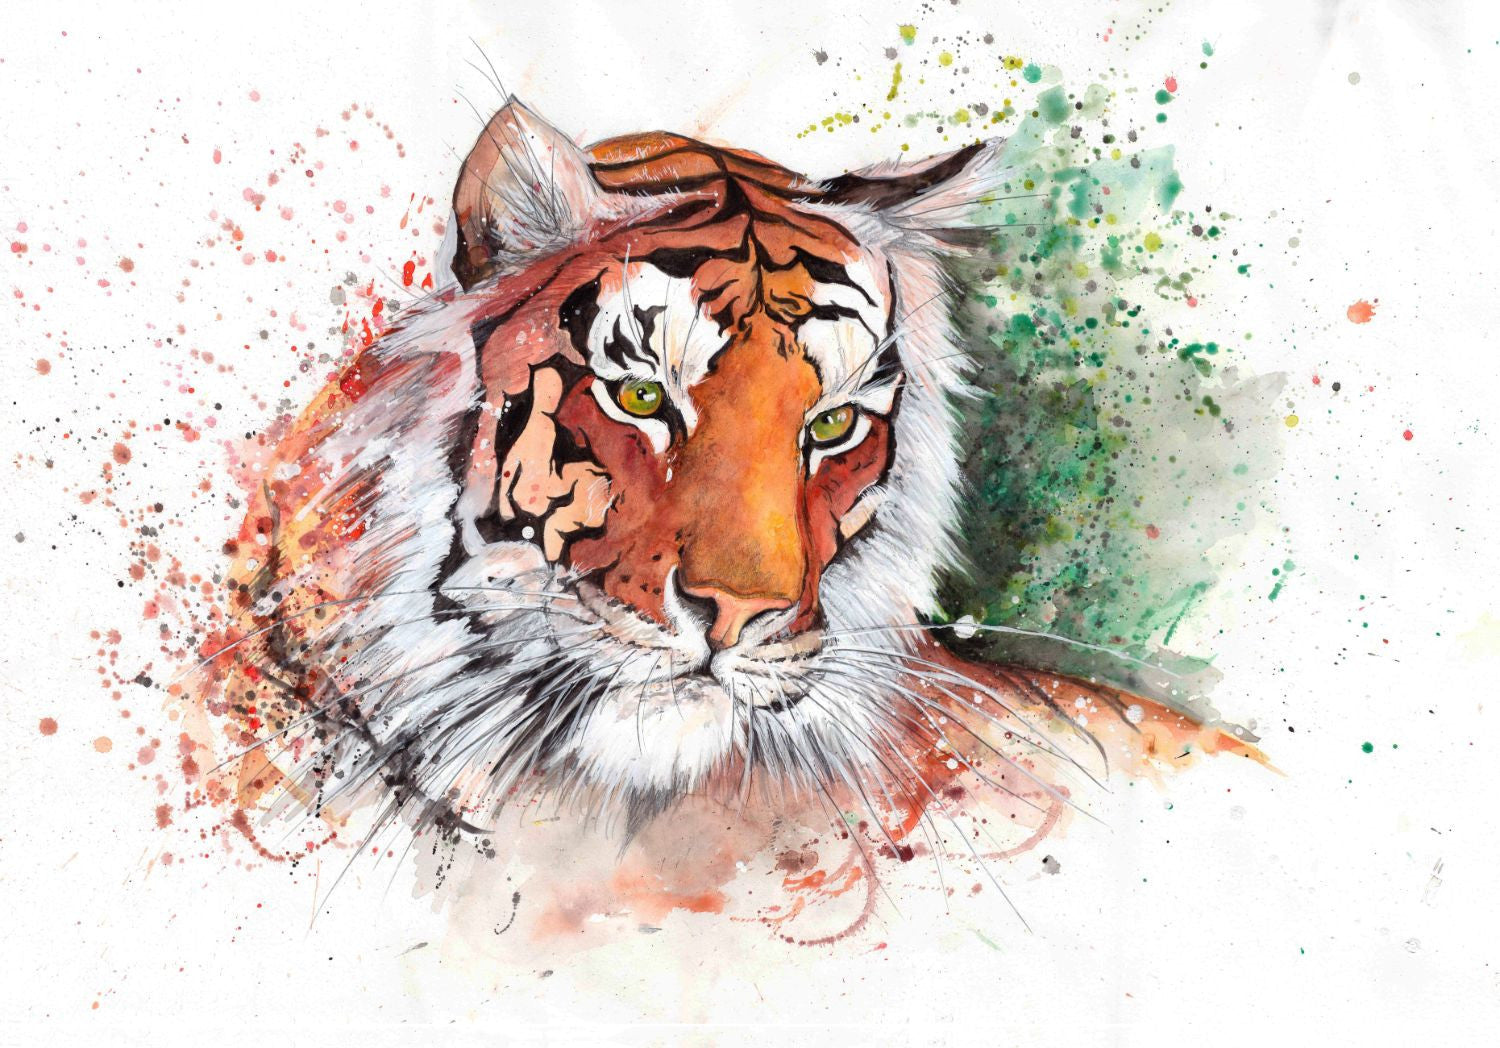 Tiger - A Watercolor - Canvas Prints by Christopher Noel | Buy Posters, Frames, Canvas &amp; Digital Art Prints | Small, Compact, Medium and Large Variants